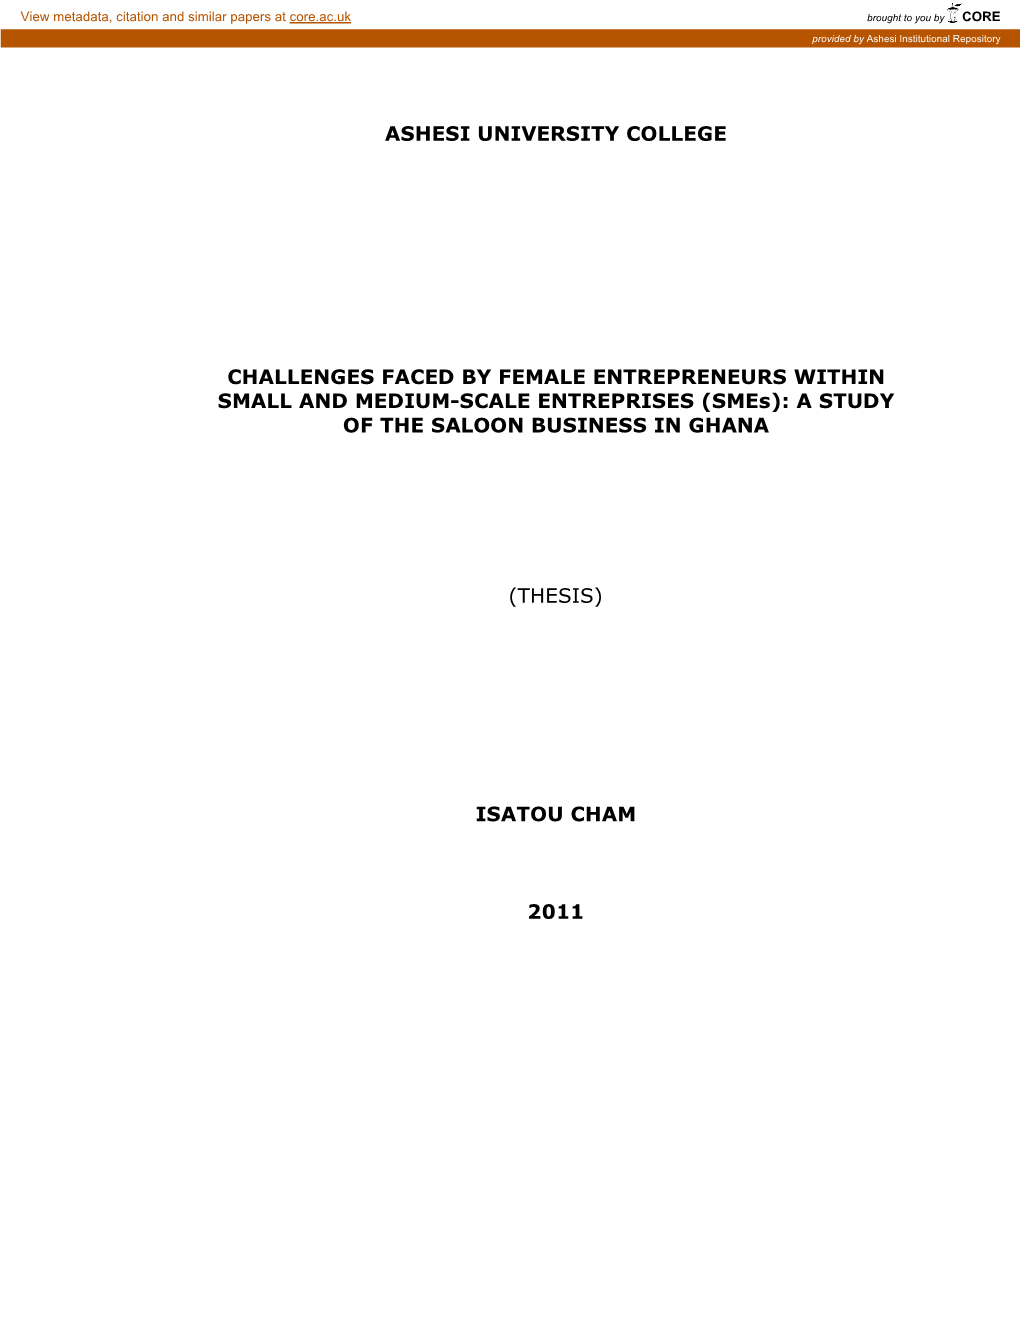 Complete Thesis Document